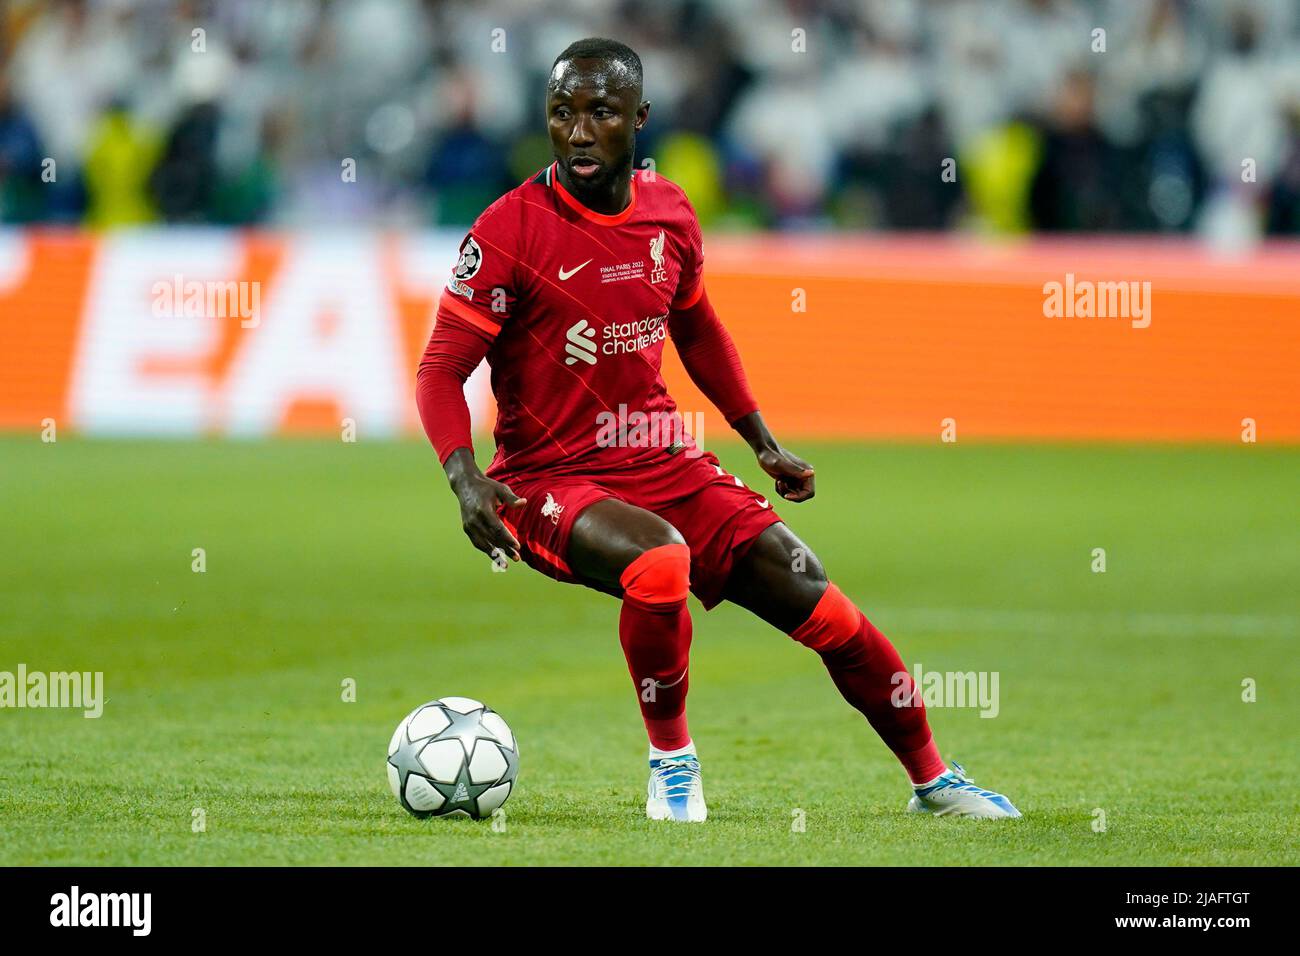 Naby Keith of Liverpool FC during the UEFA Champions League Final match between Liverpool FC and Real Madrid played at Stade de France on May 28, 2022 in Paris, France. (Photo / Magma) Stock Photo